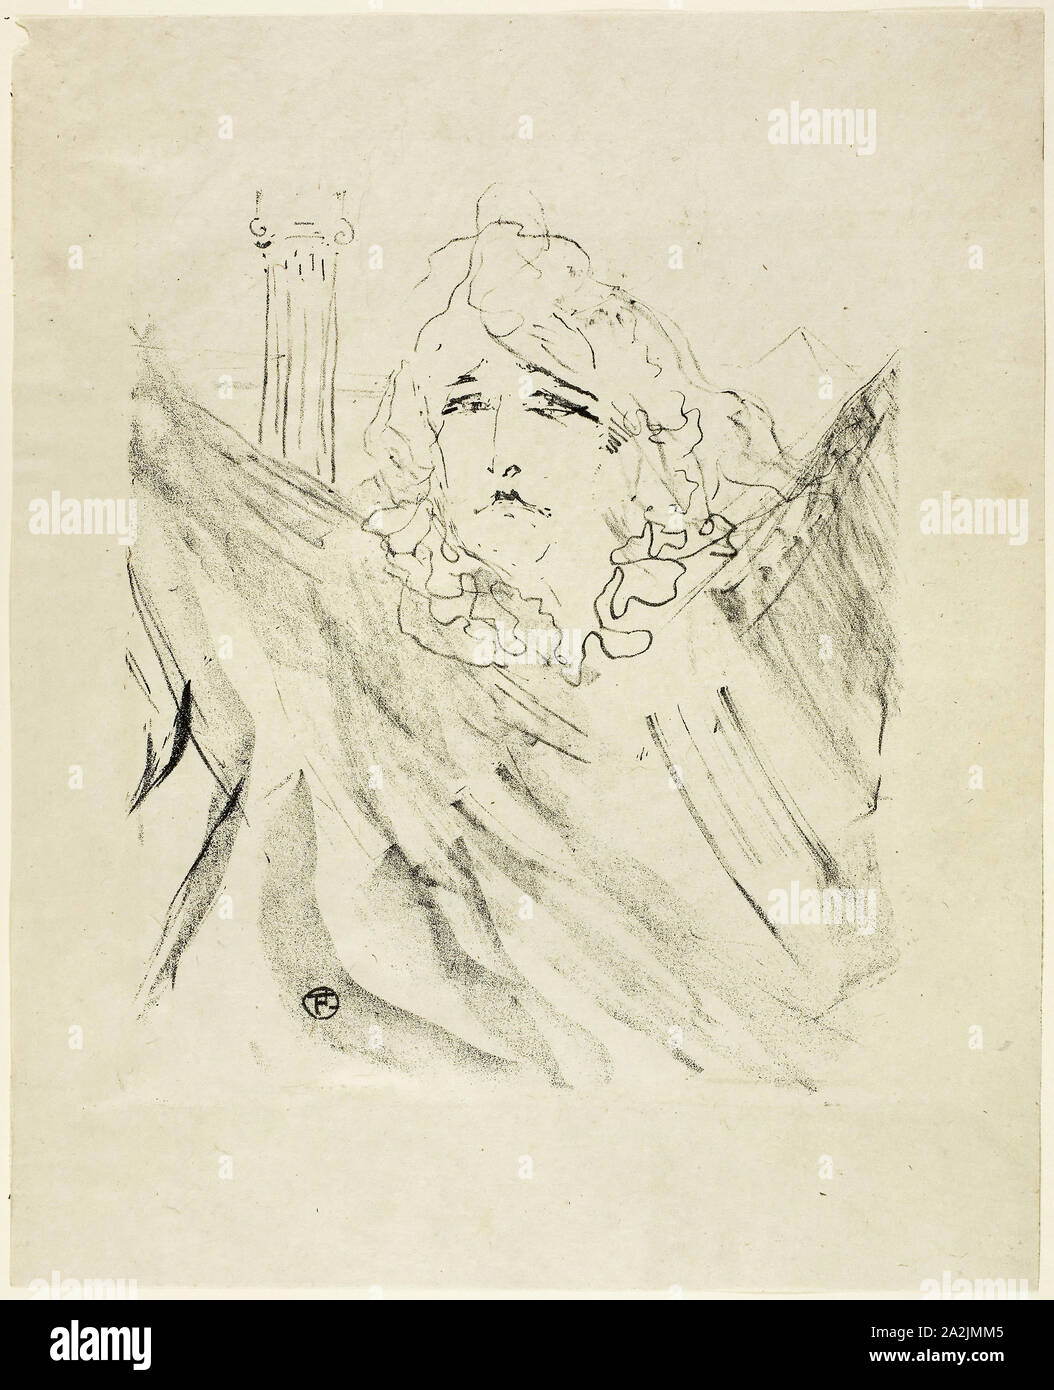 Sarah Bernhardt, from Treize Lithographies, 1898, published before 1906, Henri de Toulouse-Lautrec, French, 1864-1901, France, Lithograph on ivory laid paper, 282 × 238 mm (image), 391 × 316 mm (sheet Stock Photo